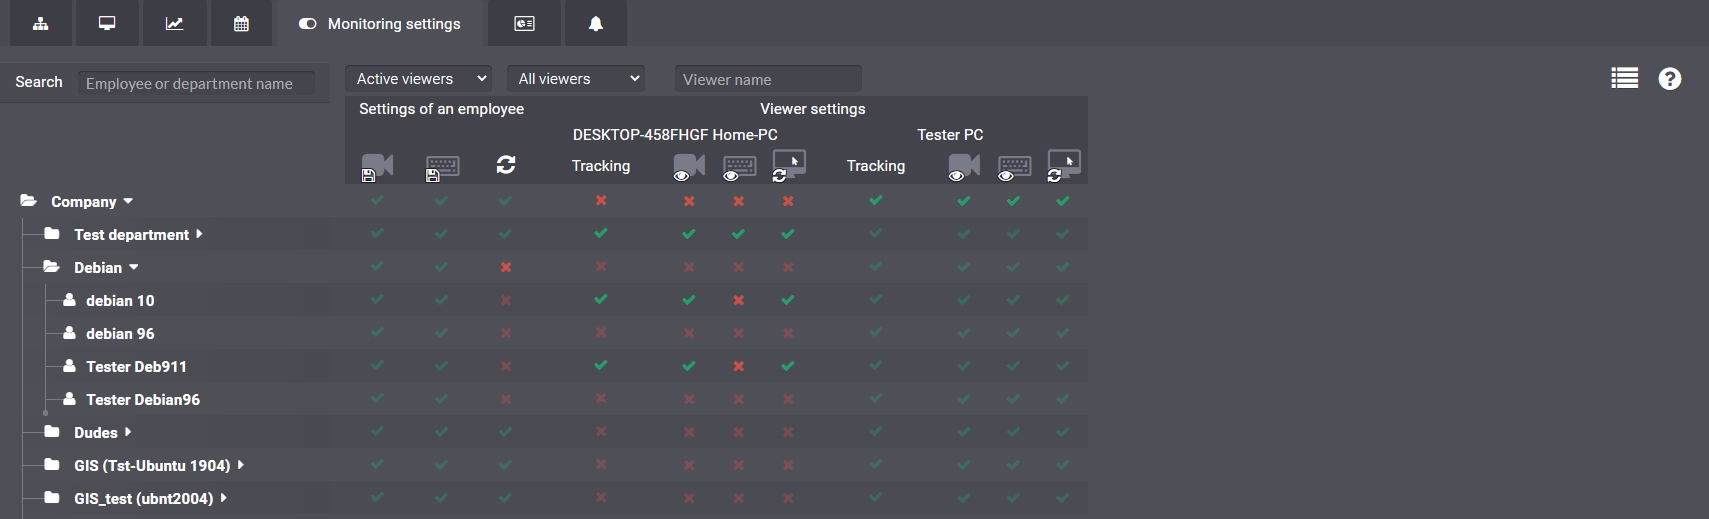 Screenshot 2. Settings of employee visibility for a specific Viewer in the web interface of the Central Server.